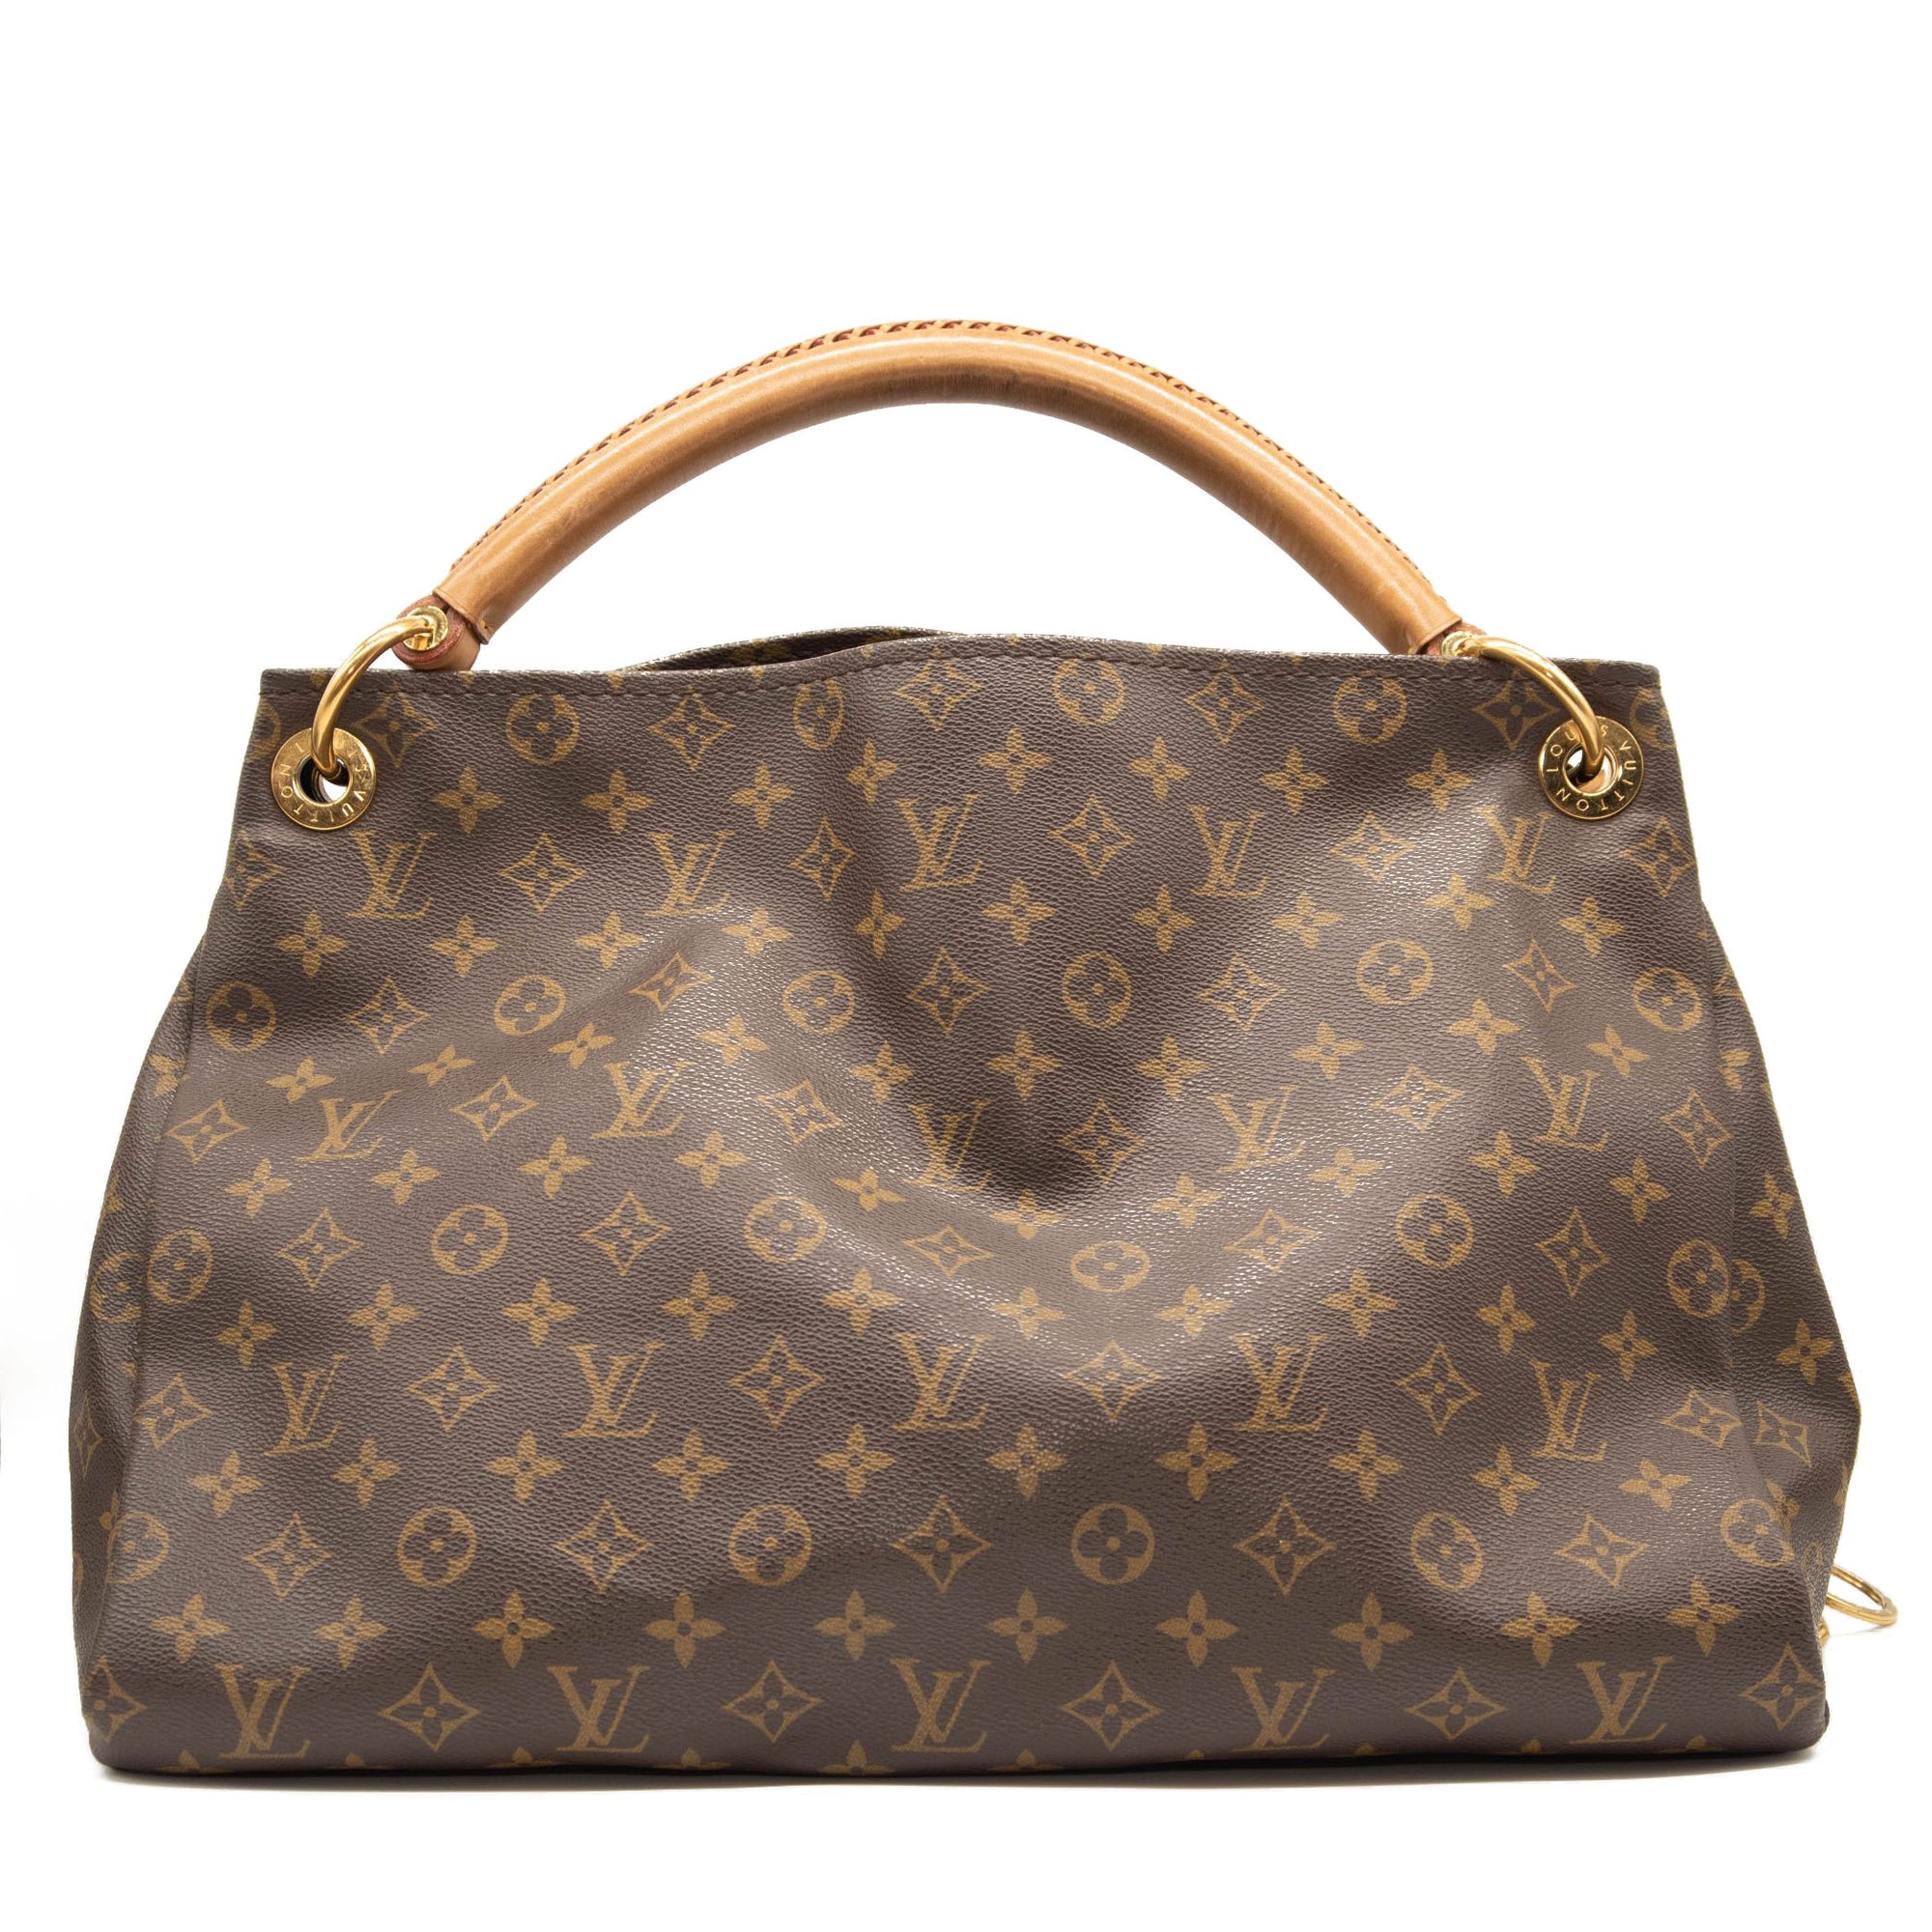 Louis Vuitton, Bags, Louis Vuitton Artsy Like New Used Twice